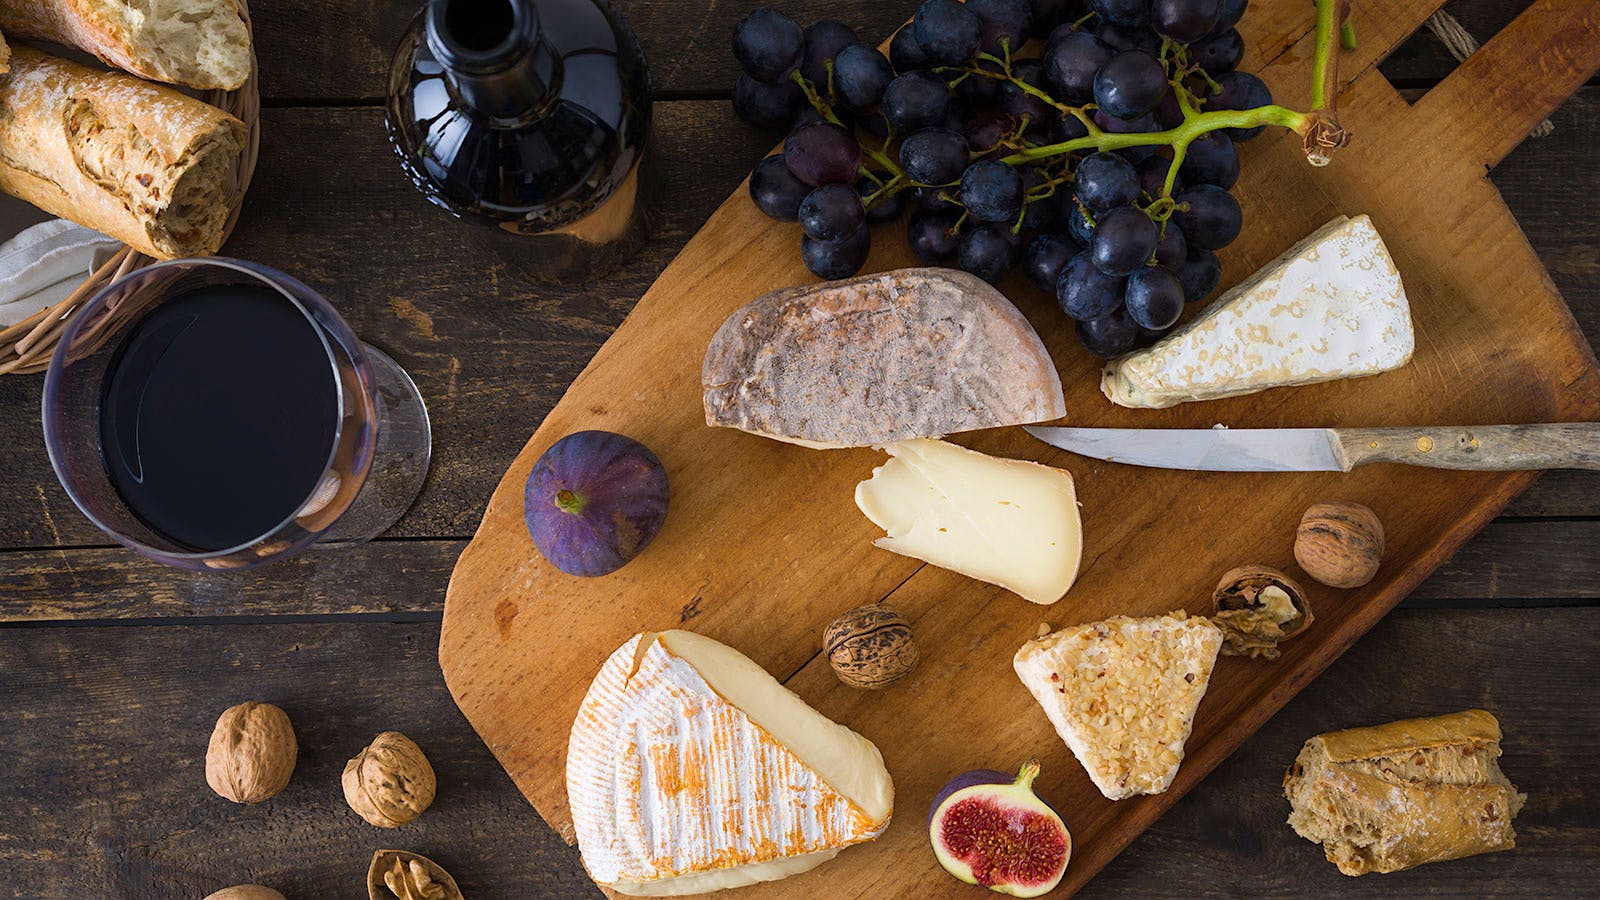 Moderate Wine, Cheese and Coffee Consumption Linked to Healthier Hearts